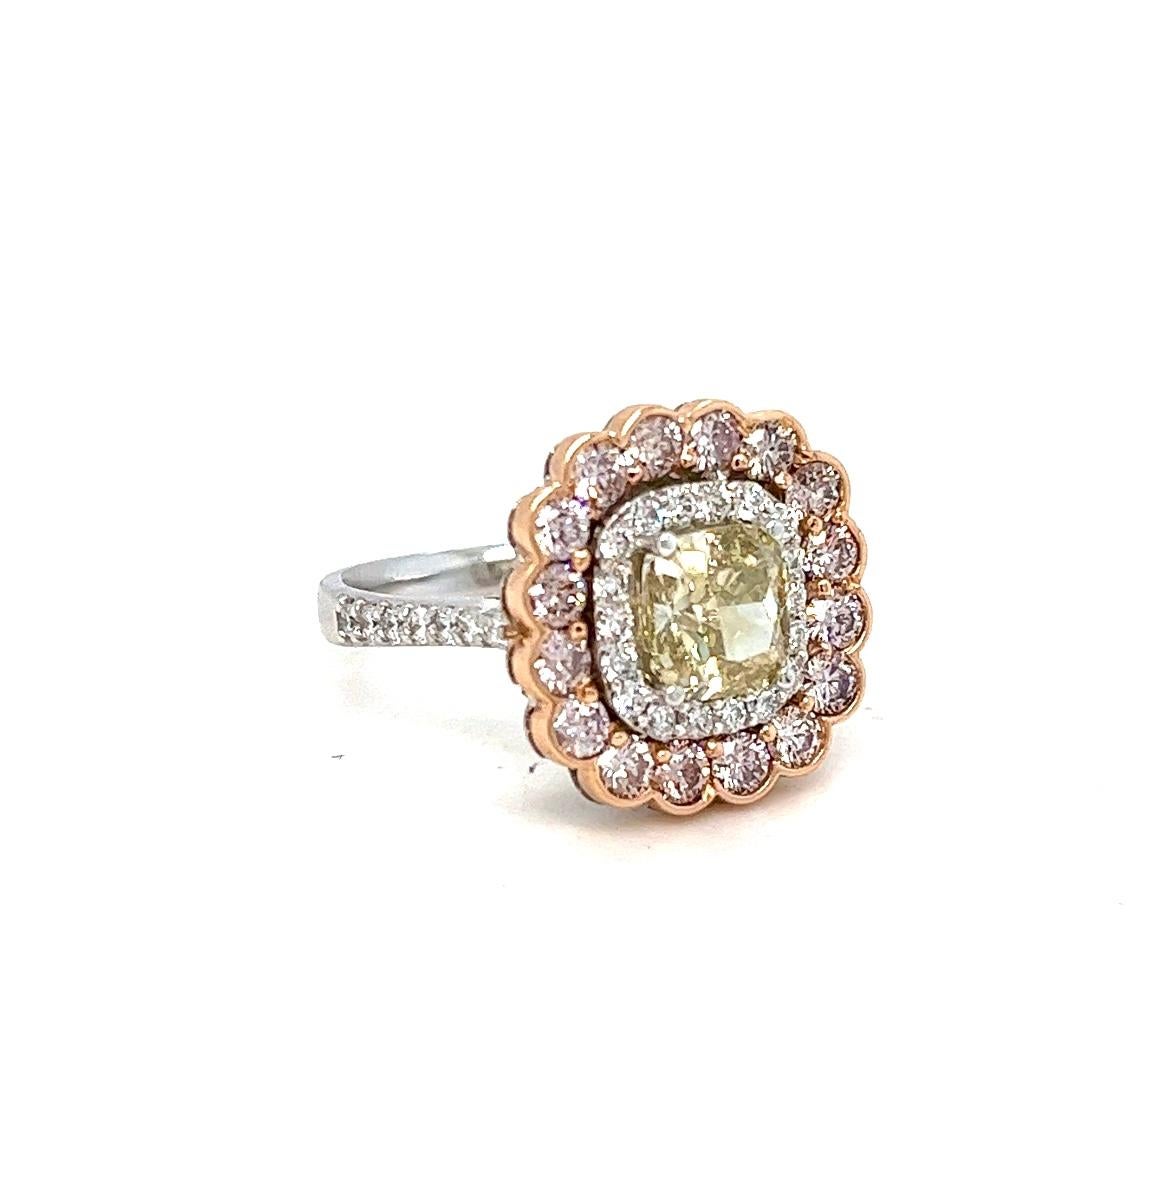 Natural Yellow  Cushion Diamond in Pink & White Diamond Halo Ring, 3.29 ctw. For Sale 6